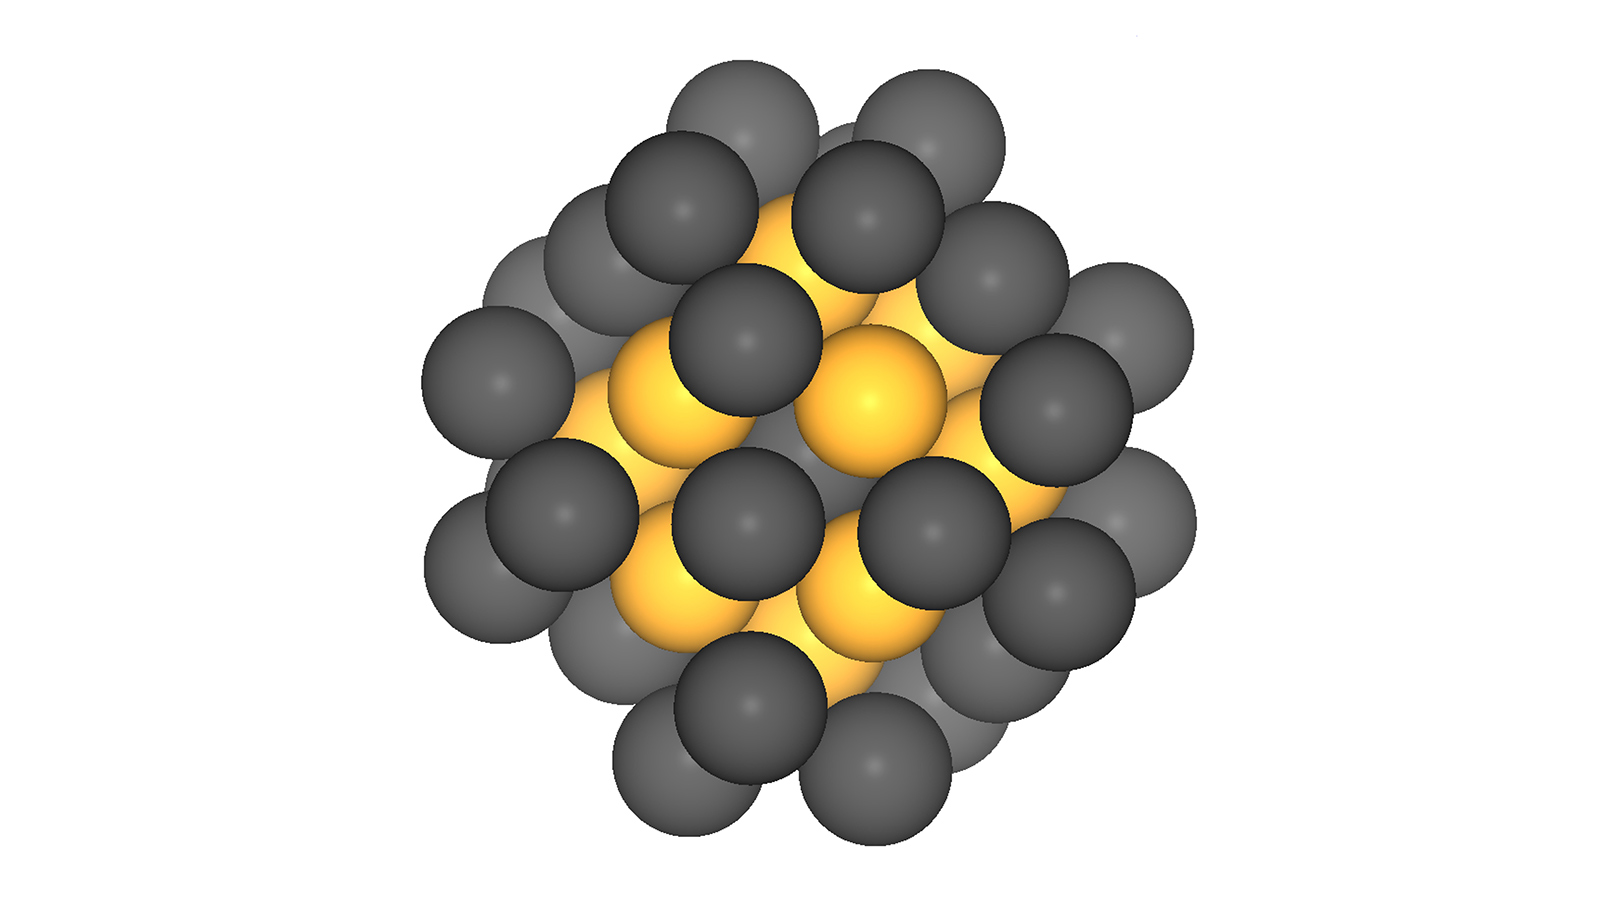 Platin-nanoparticles with 40 atoms.